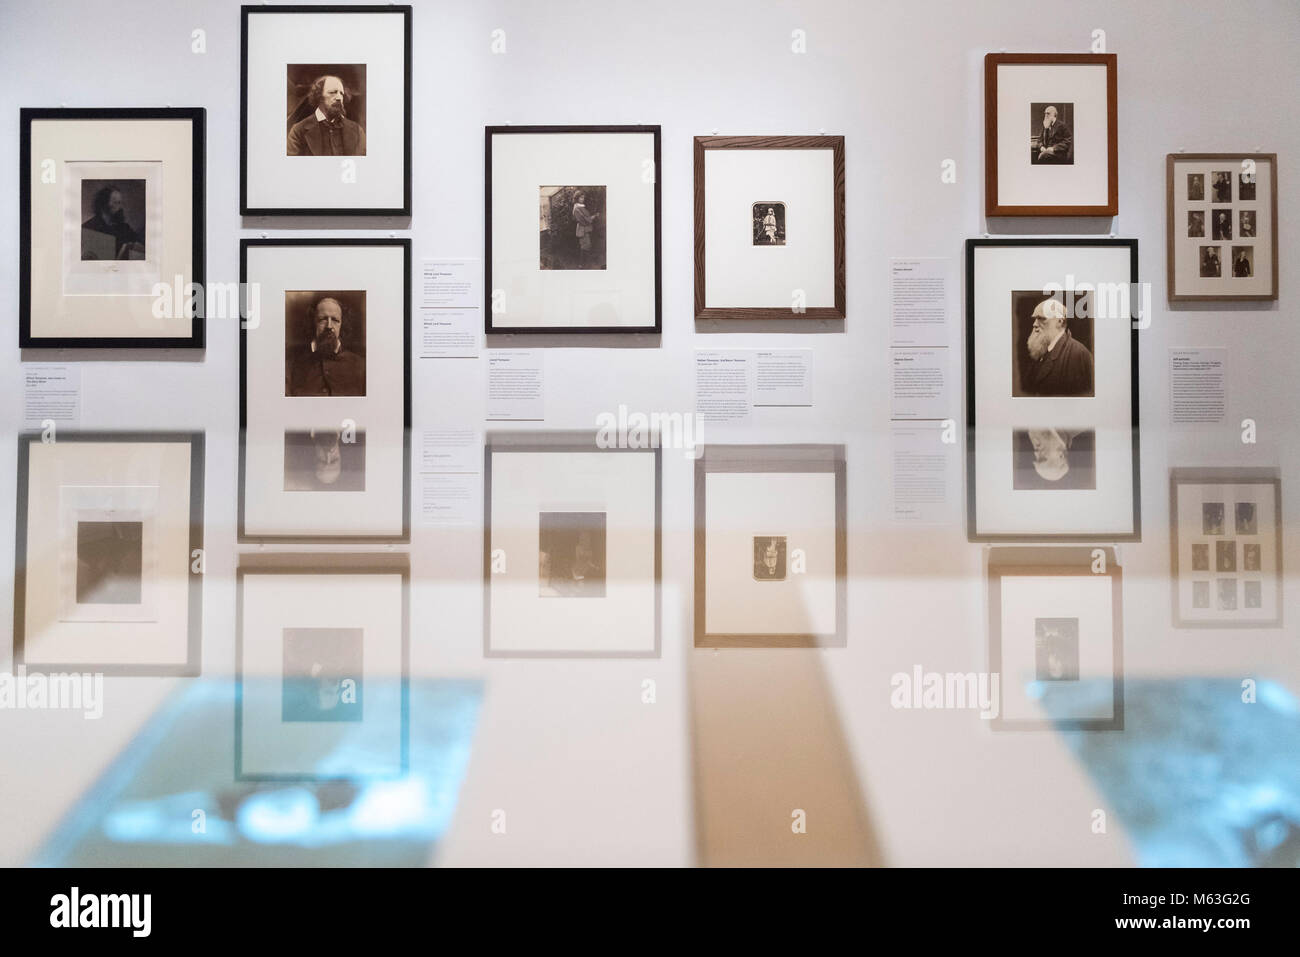 London, UK.  28 February 2018. Images on display at the preview of 'Victorian Giants:  The Birth of Art Photography' at the National Portrait Gallery featuring works by Lewis Carroll, Julia Margaret Cameron, Oscar Rejlander and Clementina Hawarden. Credit: Stephen Chung/Alamy Live News Stock Photo